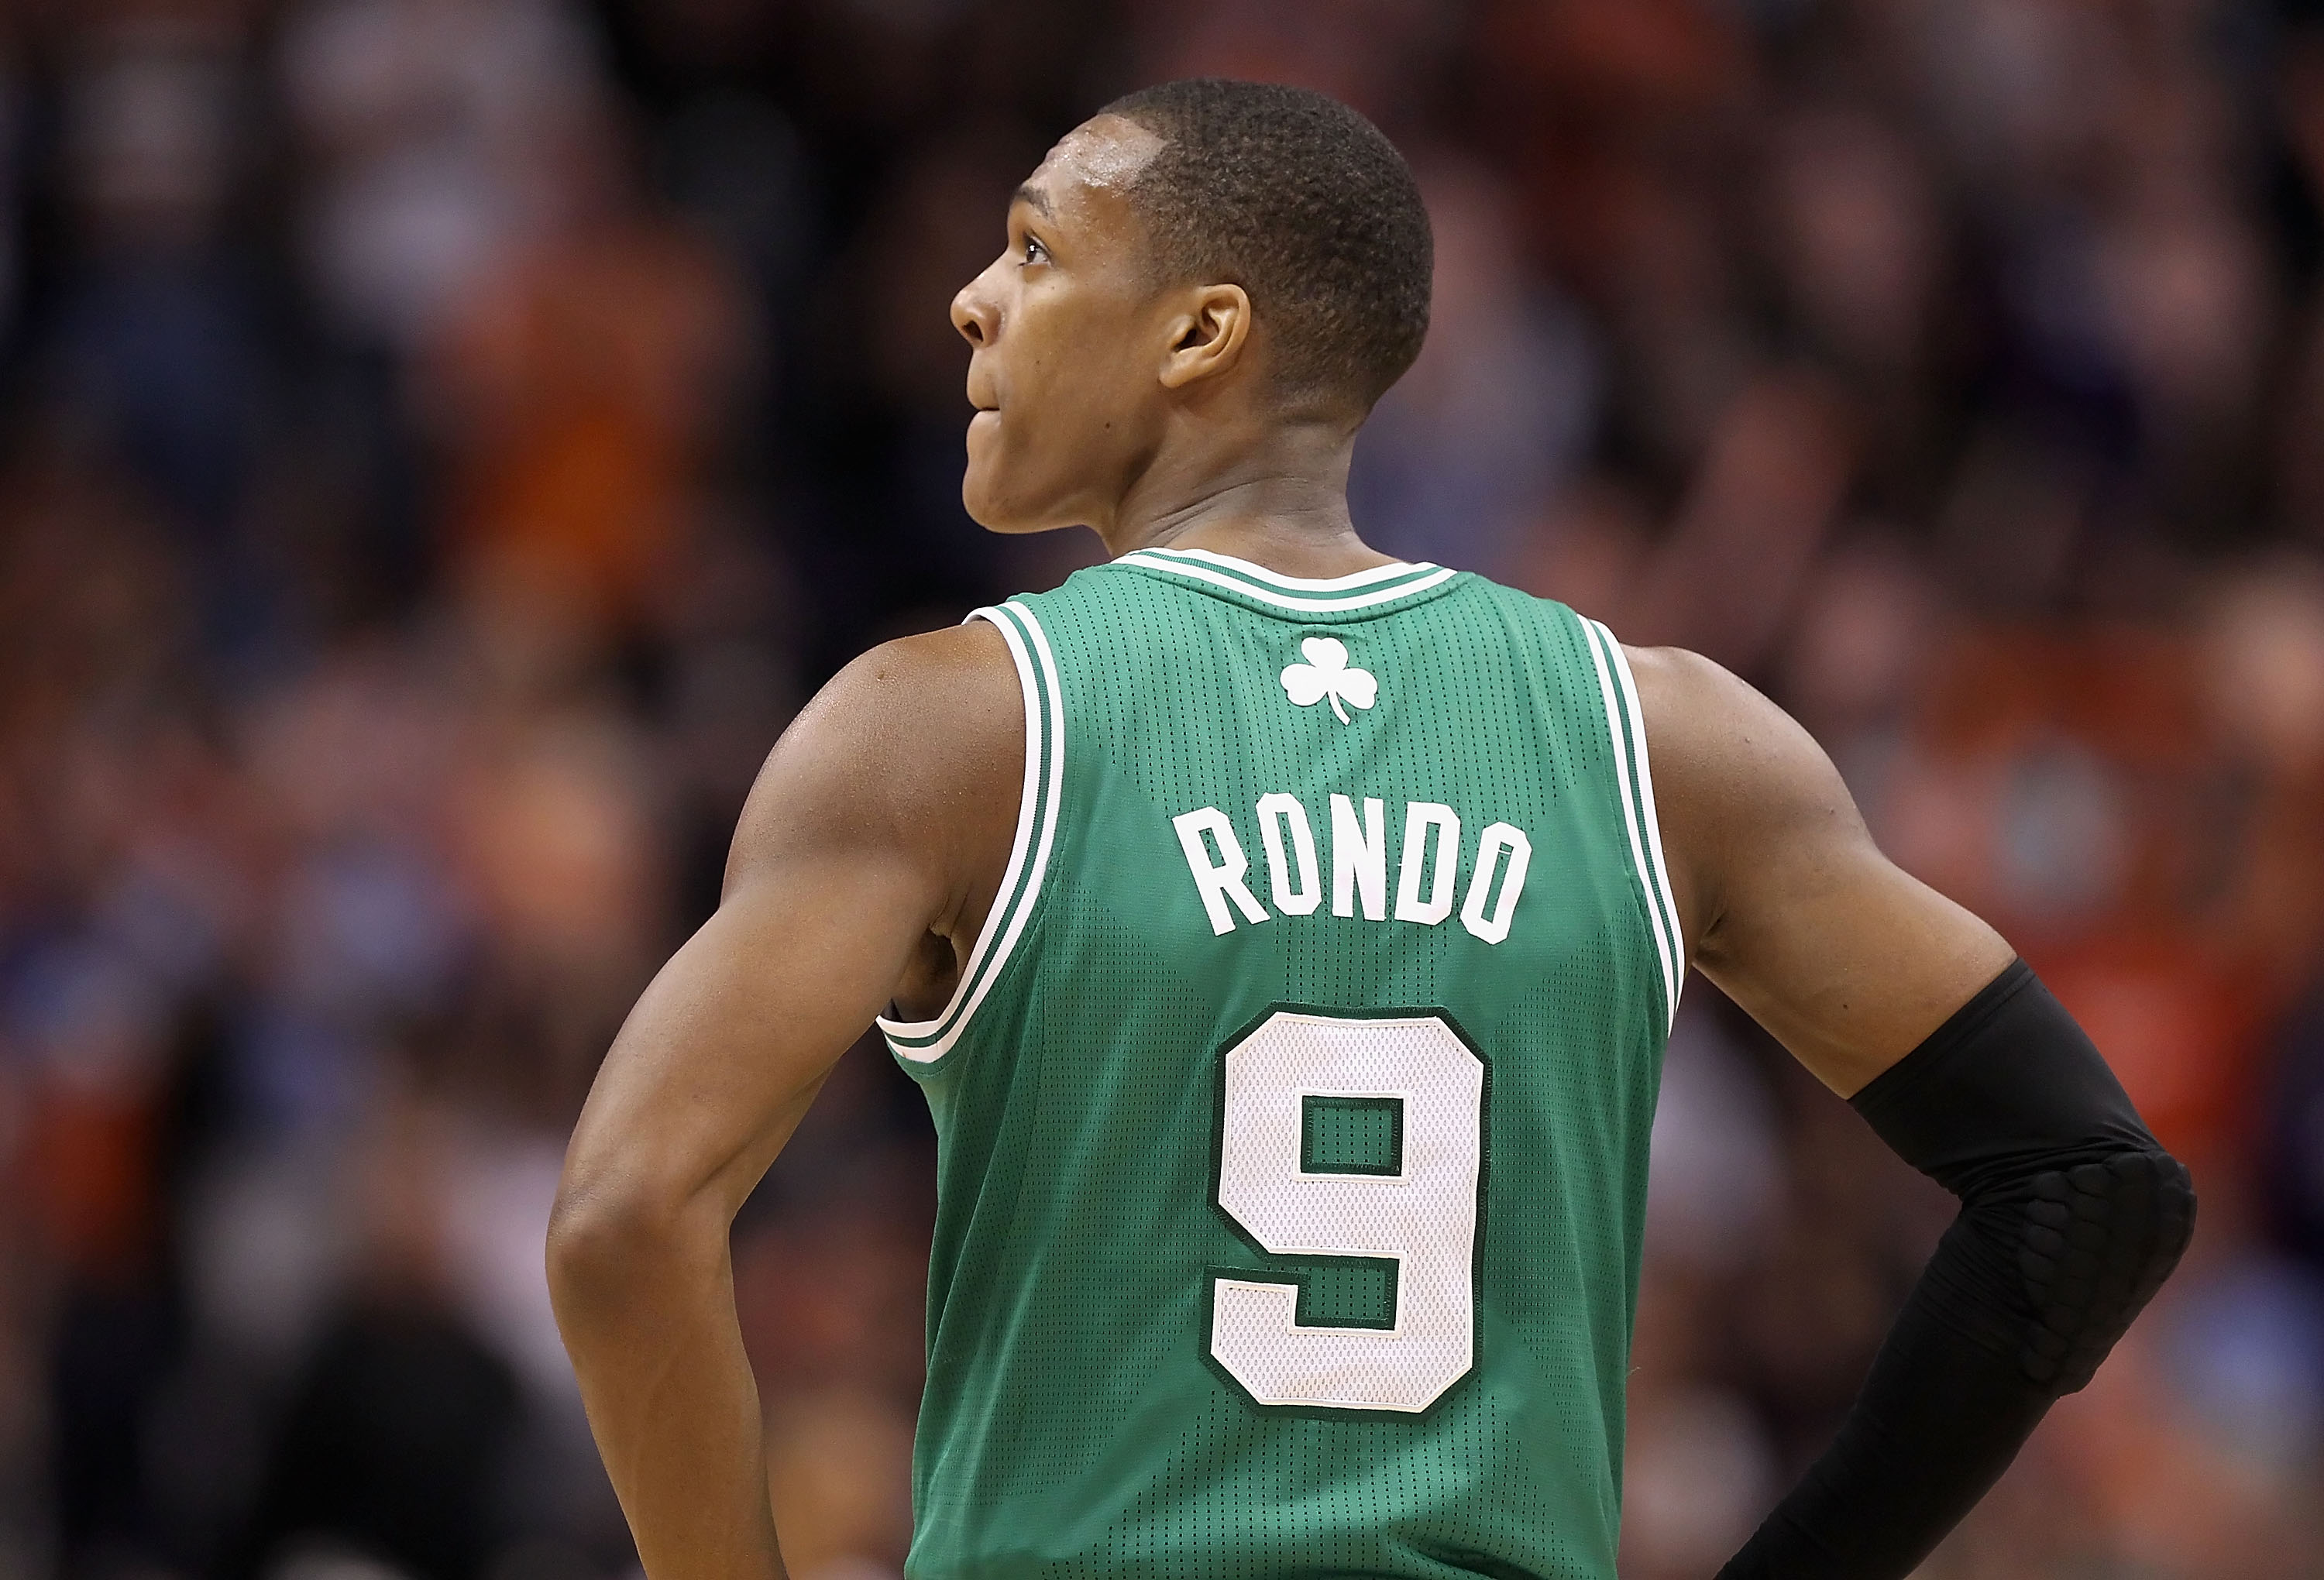 PHOENIX, AZ - JANUARY 28:  Rajon Rondo #9 of the Boston Celtics during the NBA game against the Phoenix Suns at US Airways Center on January 28, 2011 in Phoenix, Arizona.  The Suns defeated the Celtics 88-71.  NOTE TO USER: User expressly acknowledges and